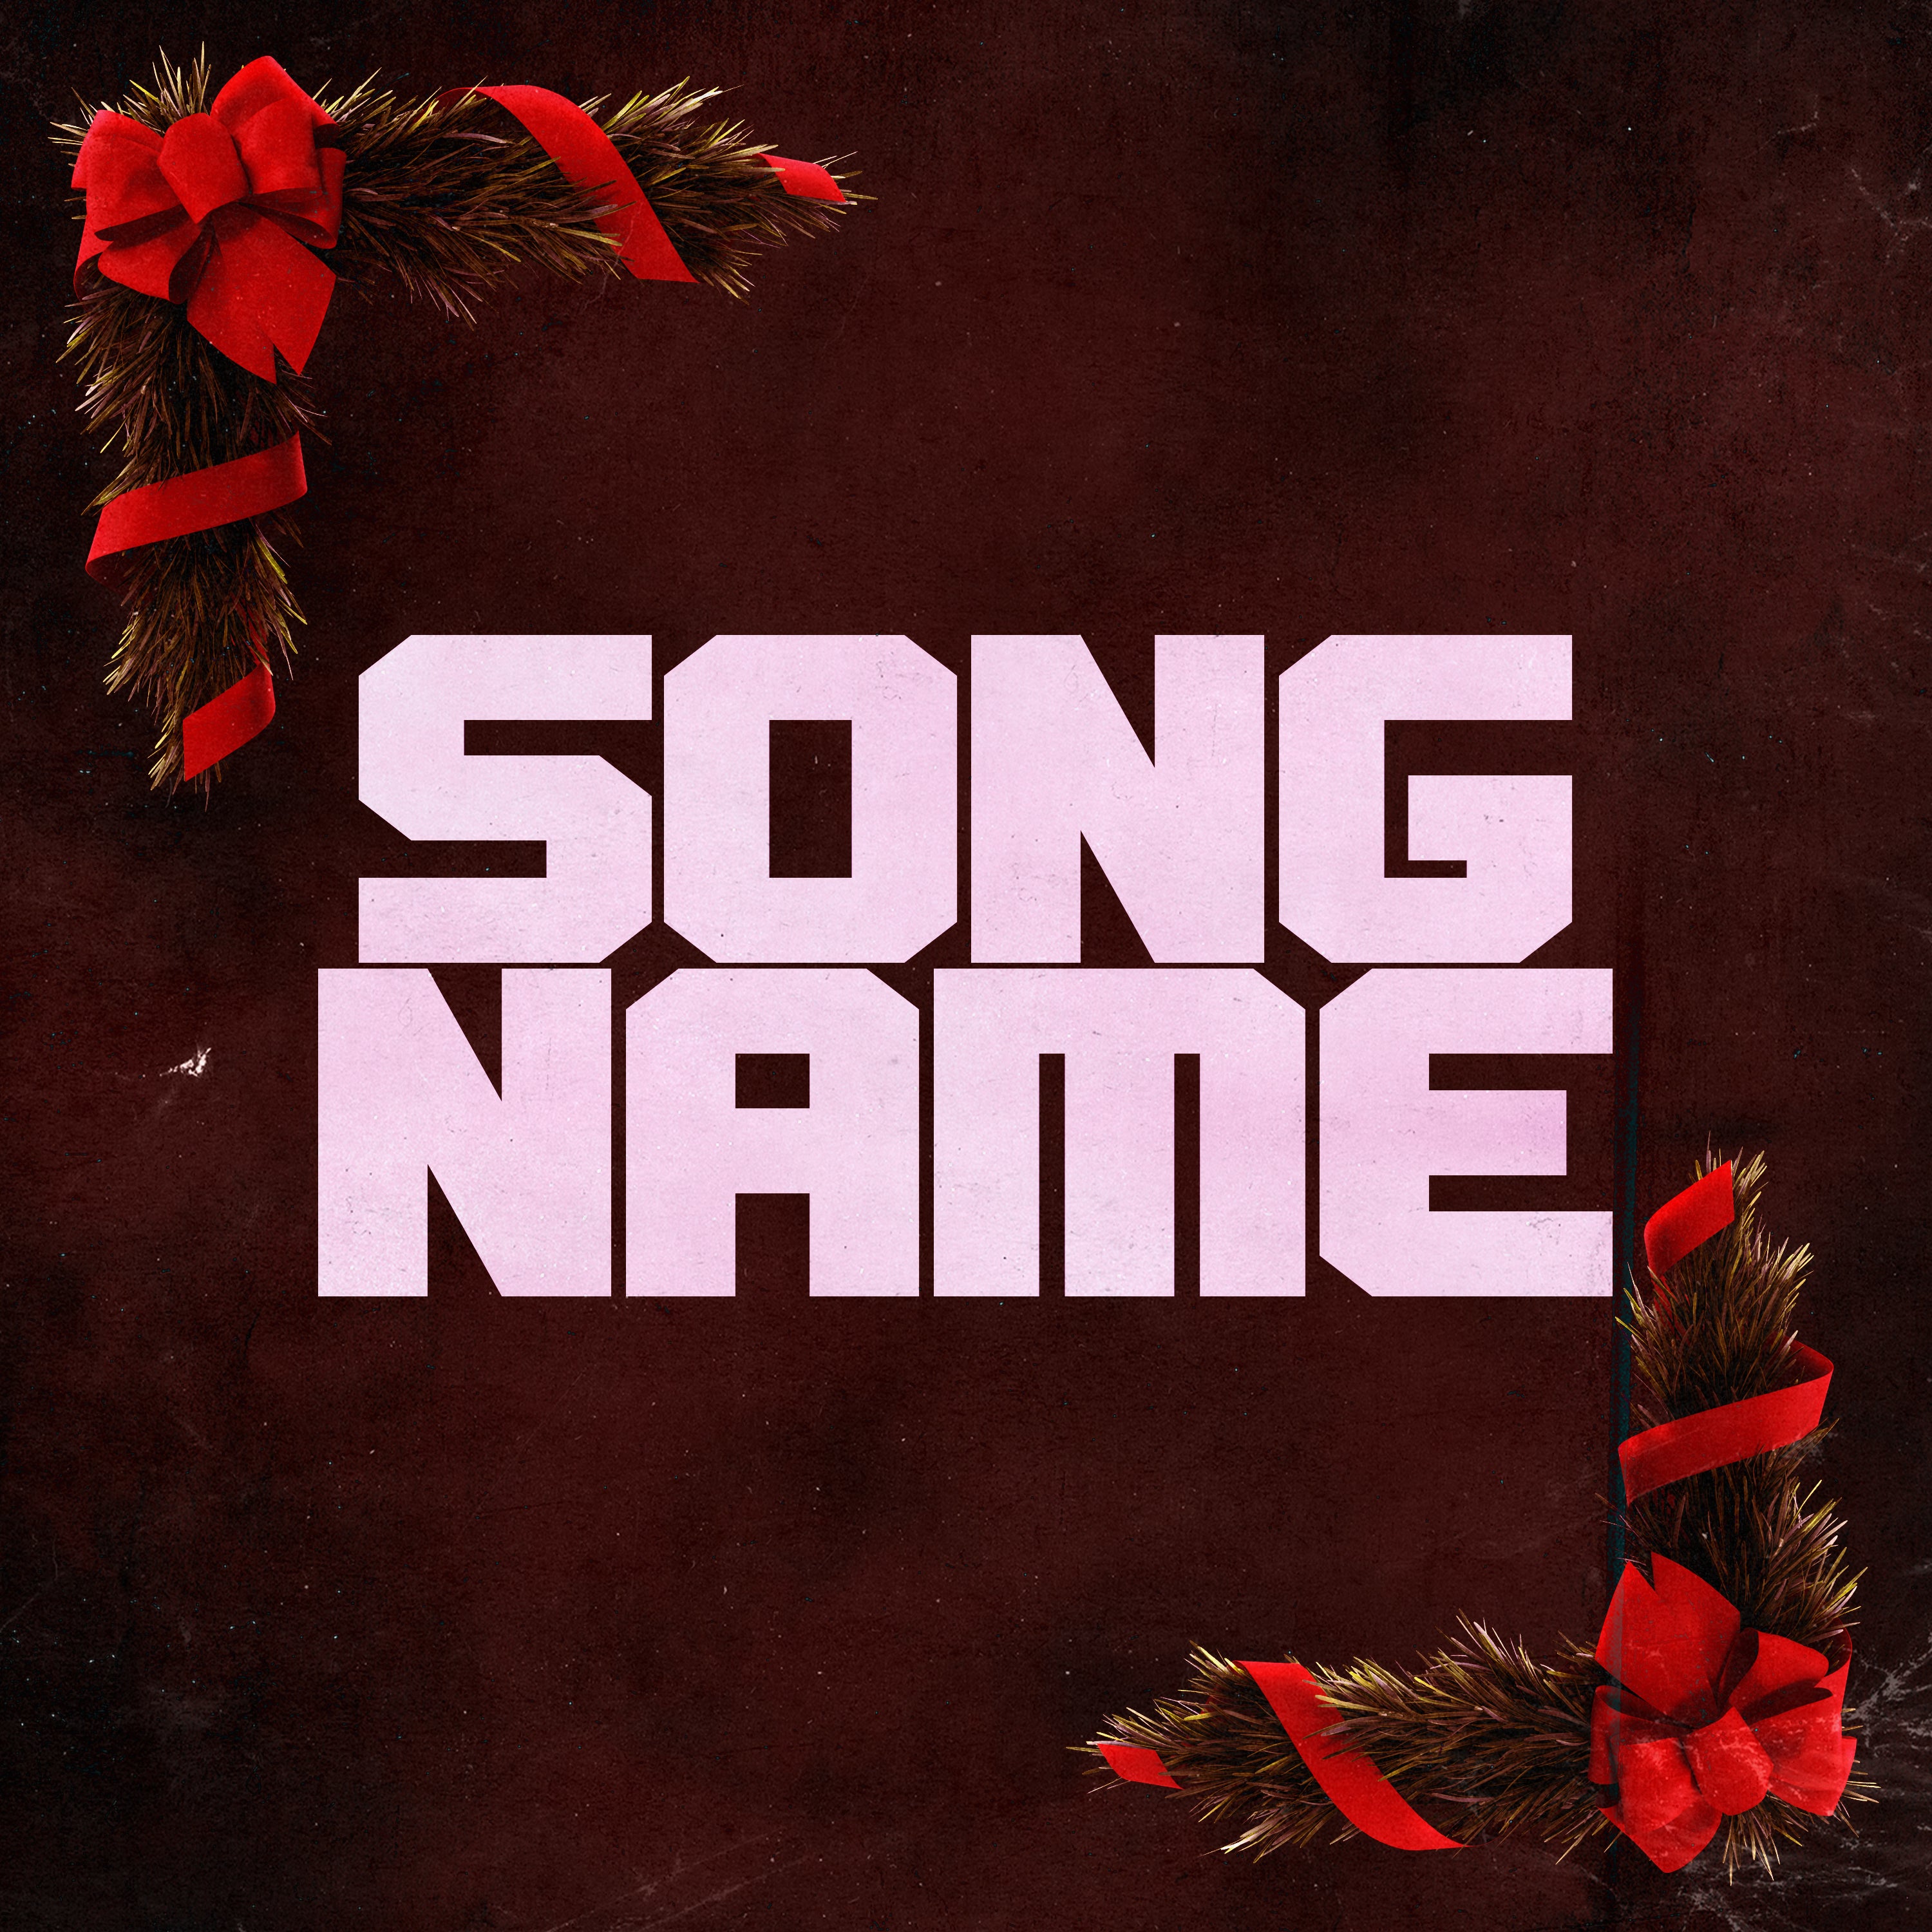 Holiday Wall - Premade Cover Art